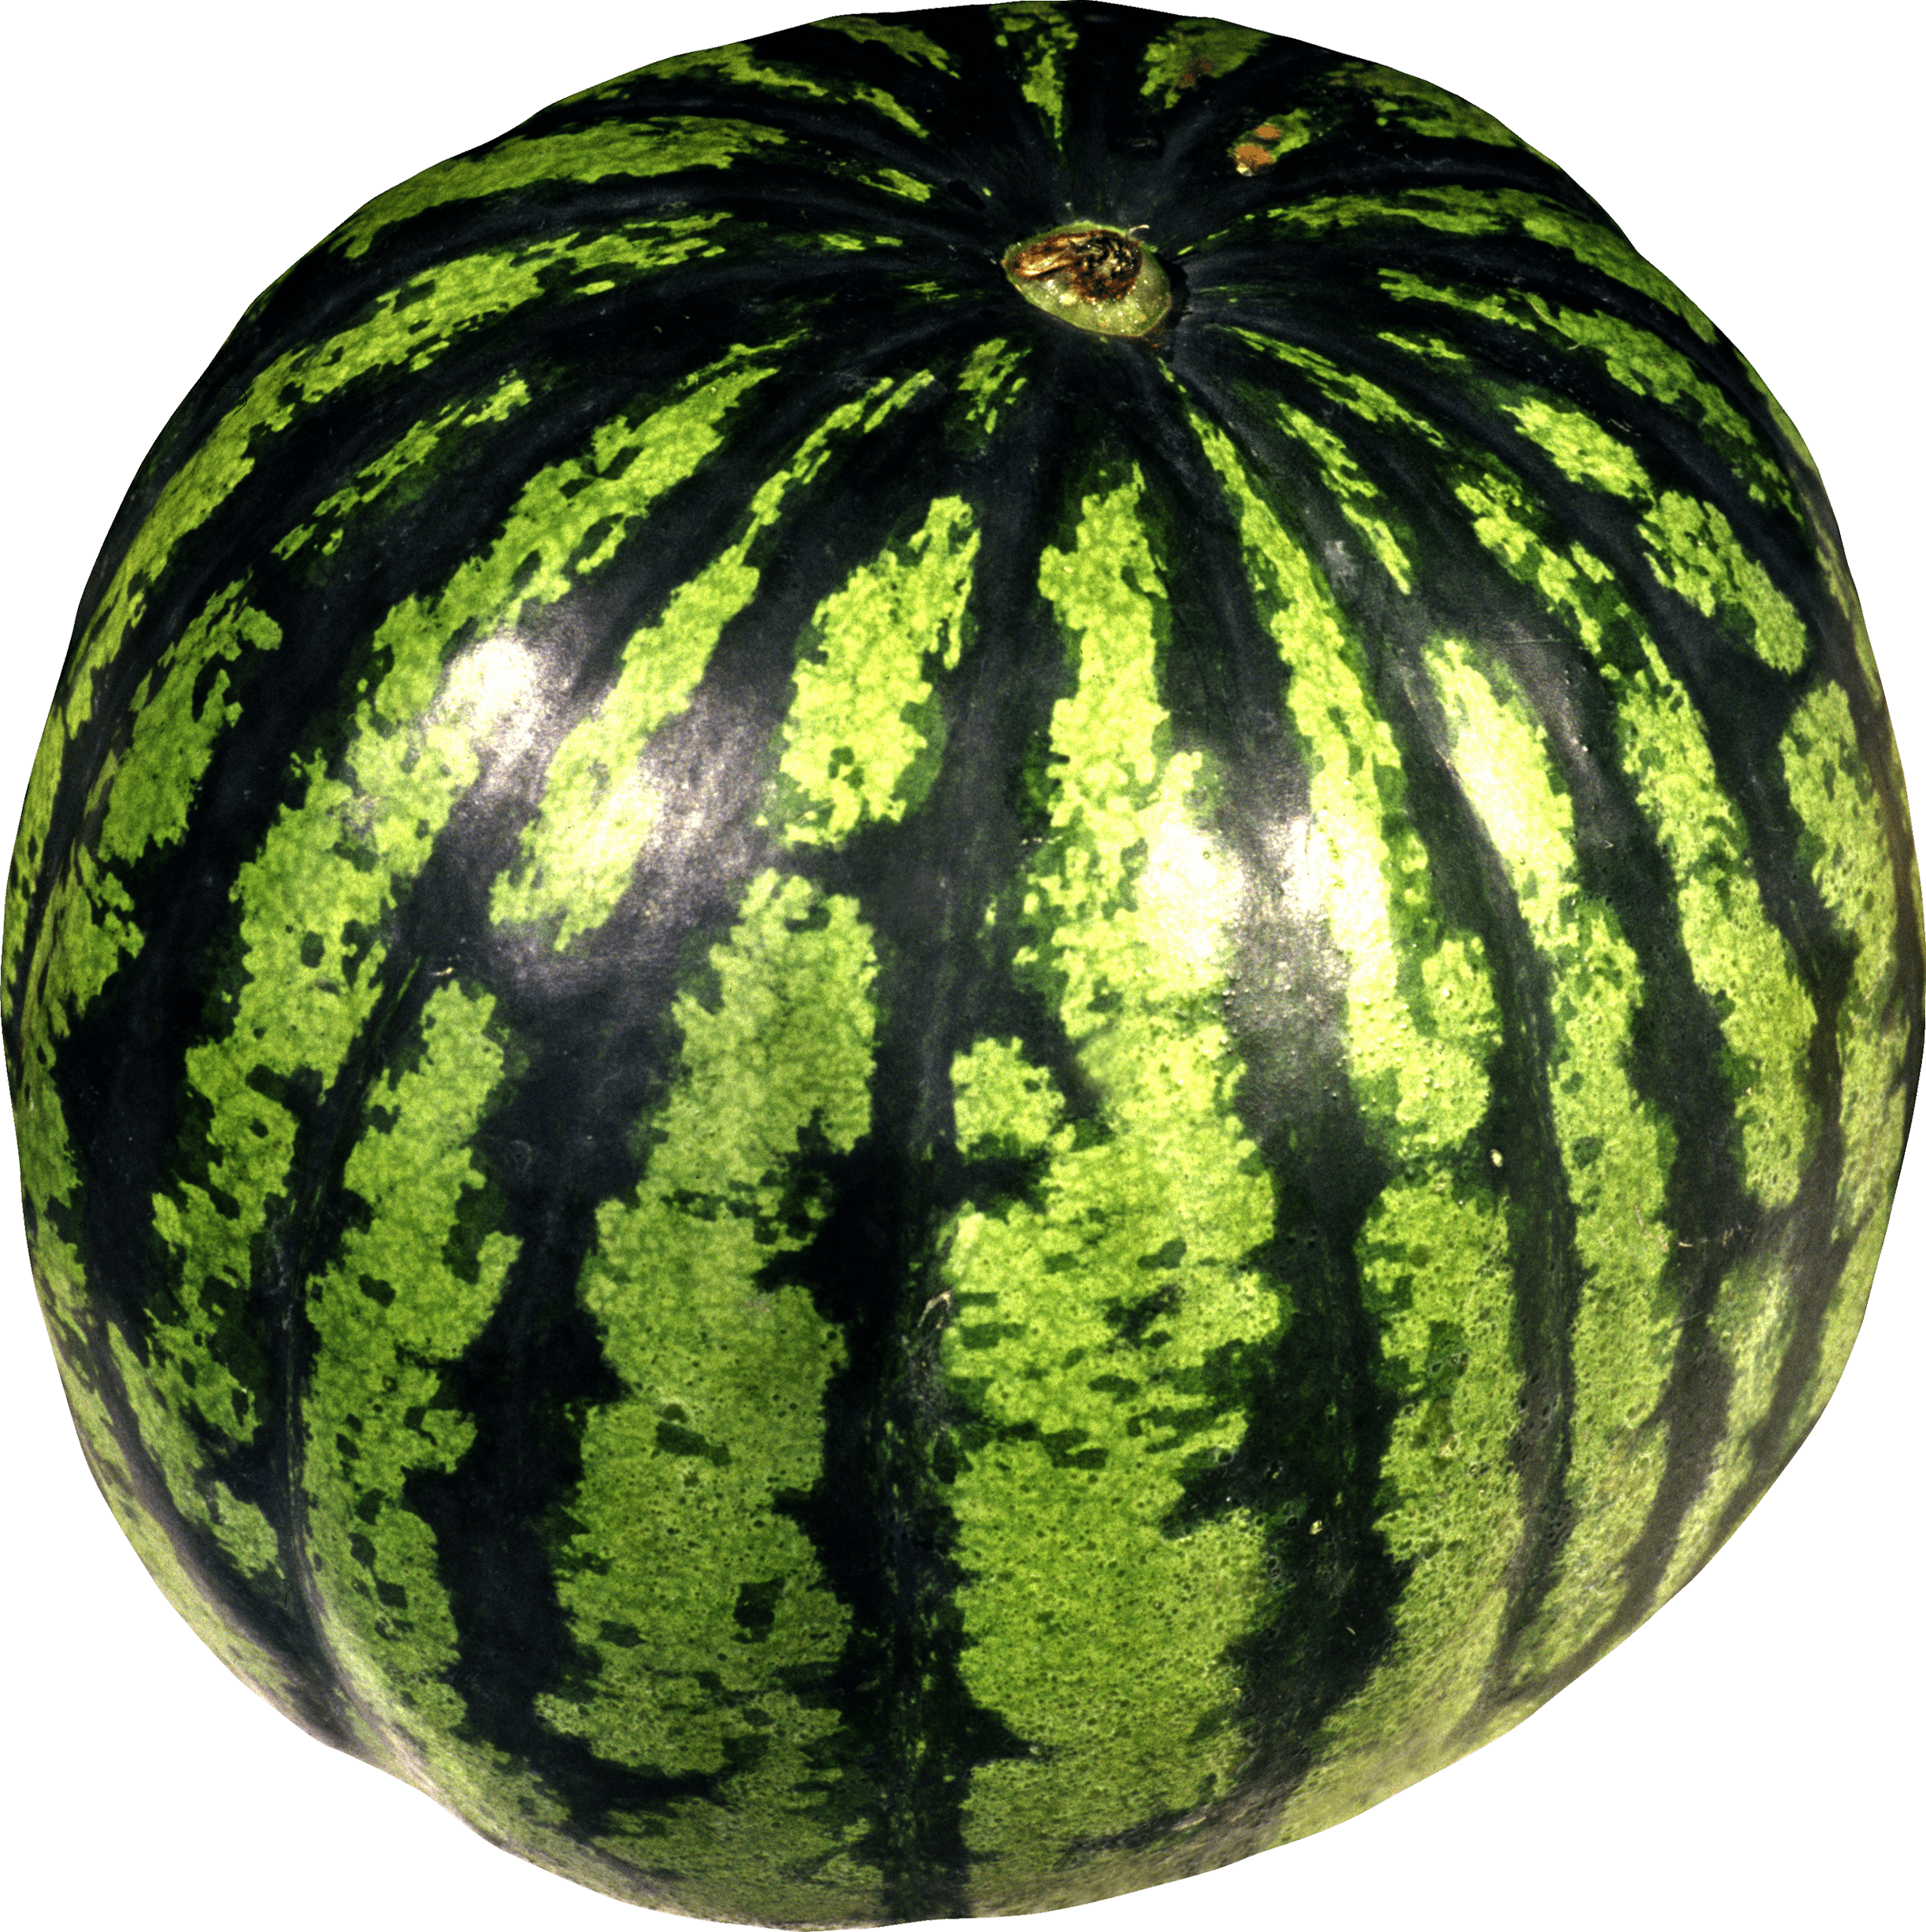 Download Watermelon Slice PNG